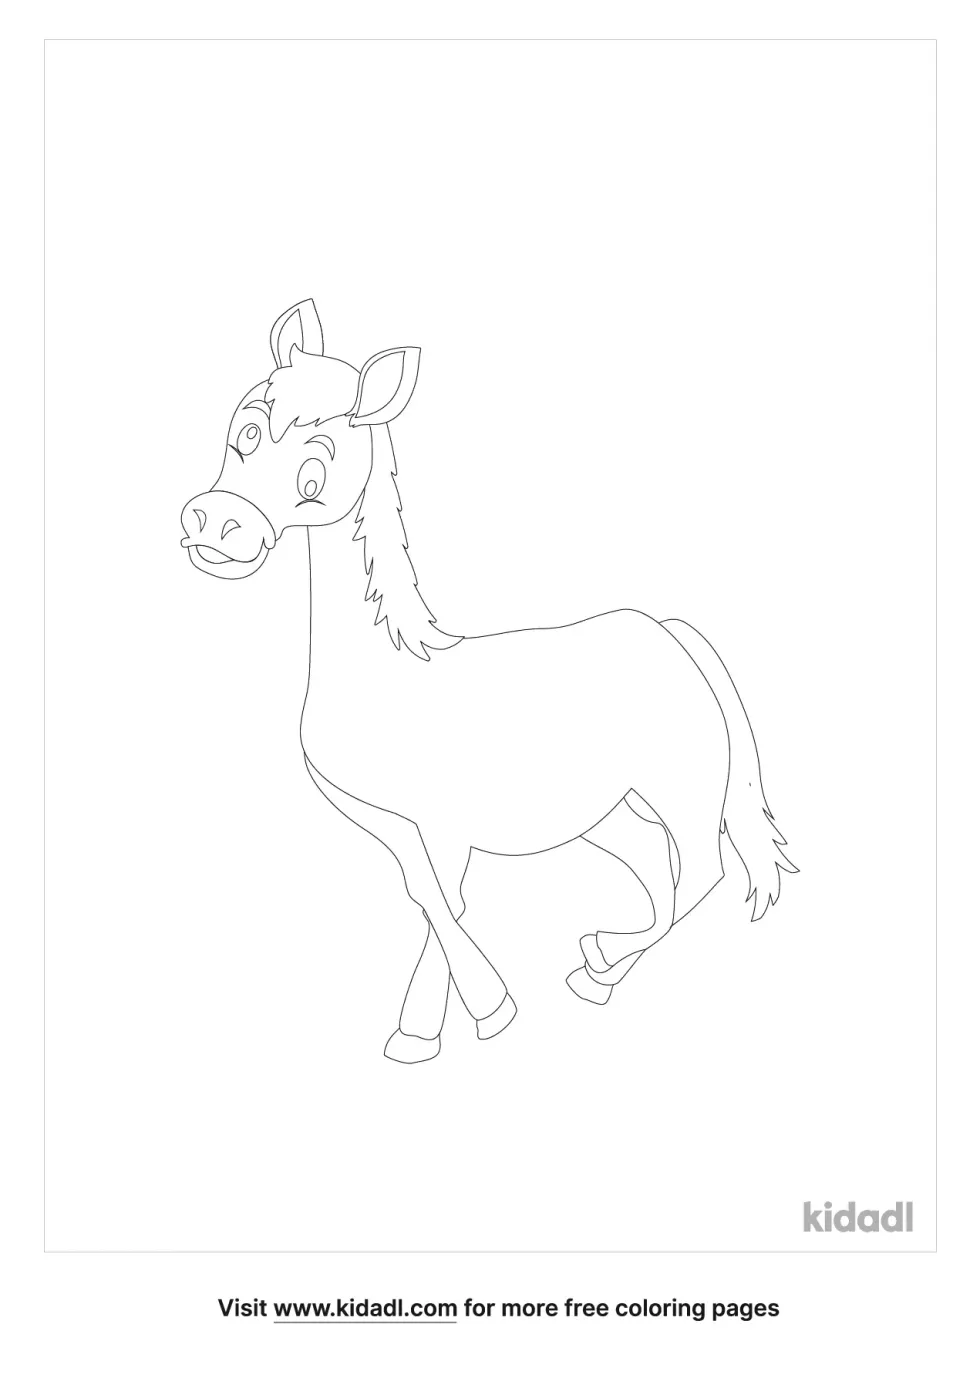 Twisting Animal Coloring Page